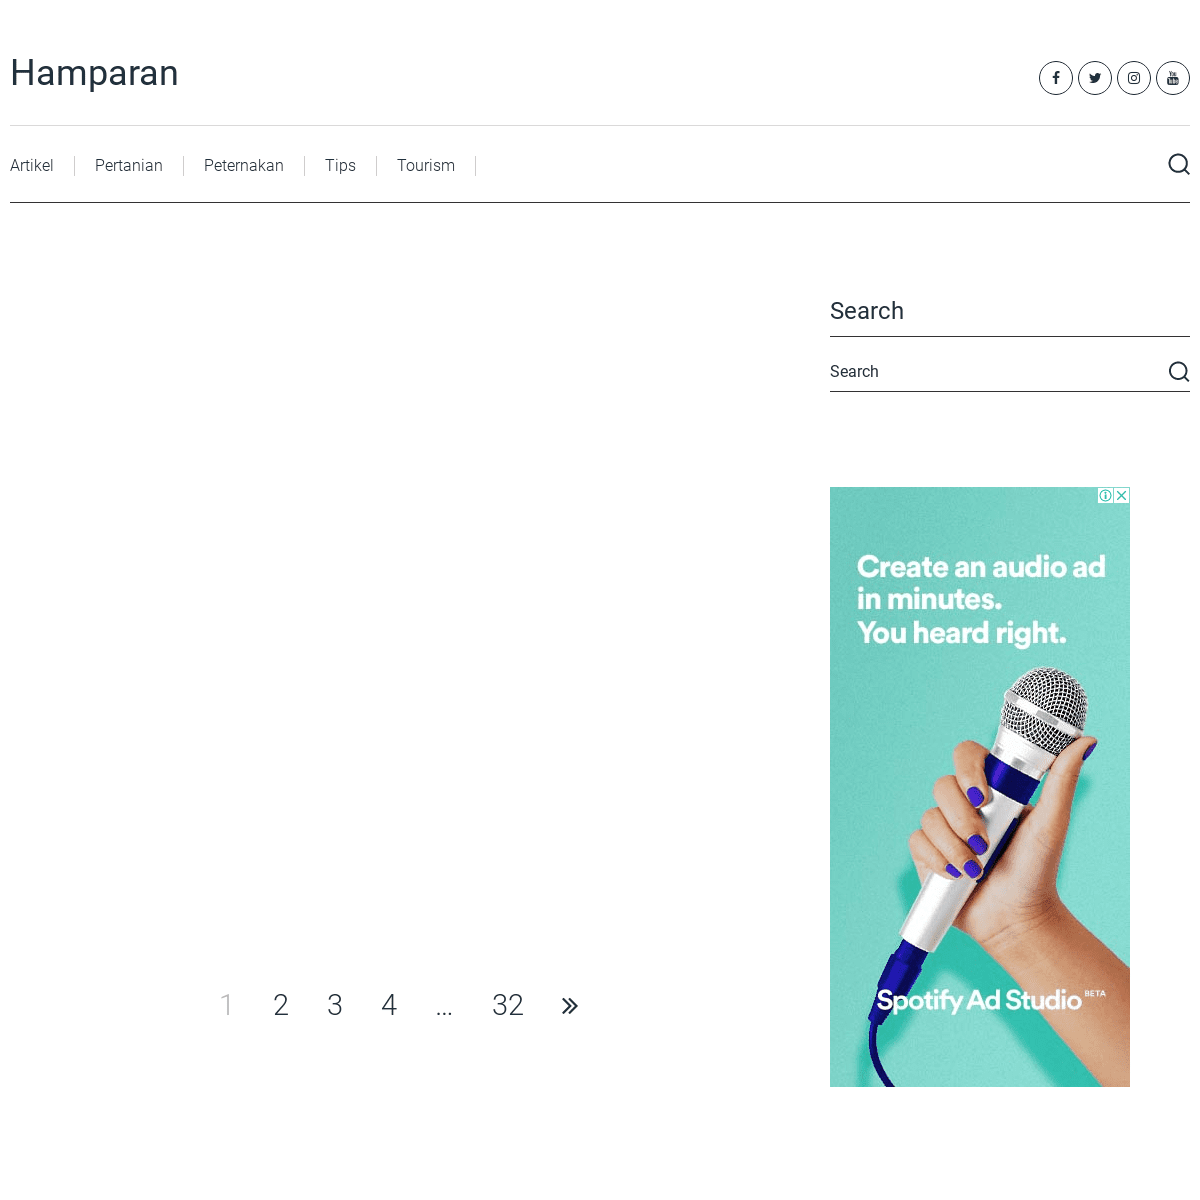 A complete backup of hamparan.net